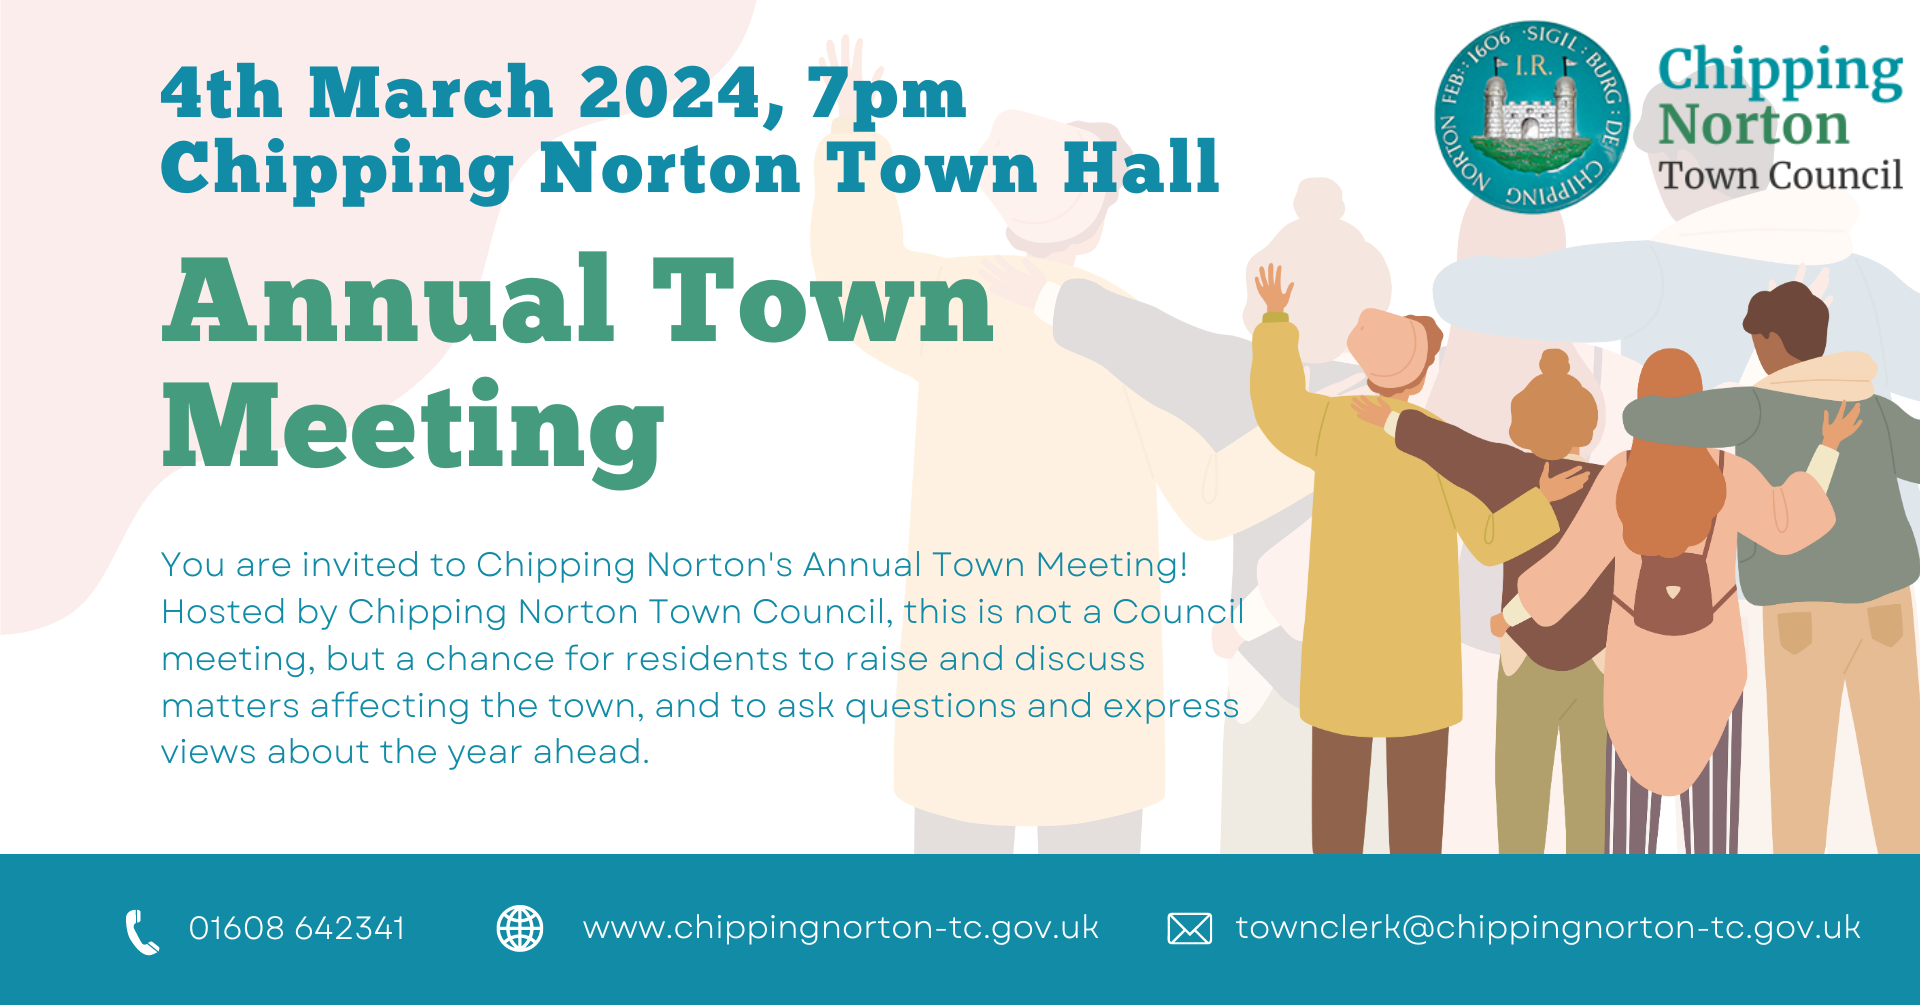 You are invited to Chipping Norton's Annual Town Meeting! 
Hosted by Chipping Norton Town Council, this is not a Council meeting, but a chance for residents to raise and discuss matters affecting the town, and to ask questions and express views about the year ahead.